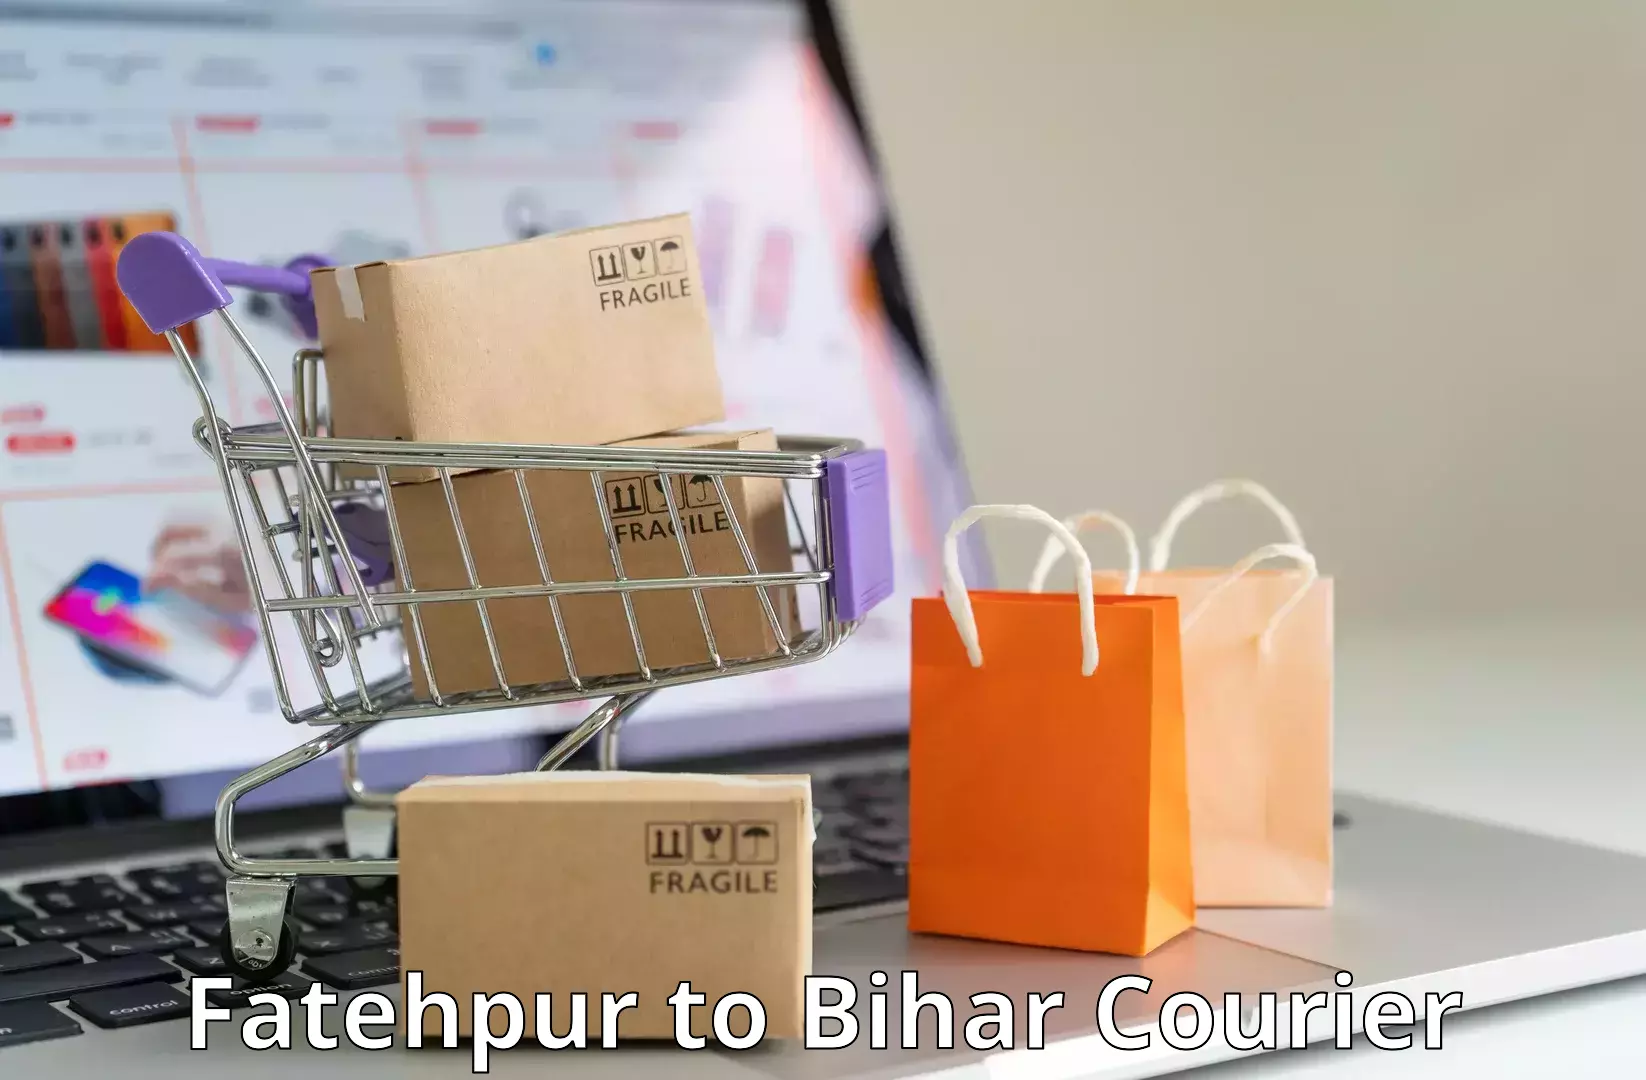 Small business couriers Fatehpur to Jagdishpur Bhojpur